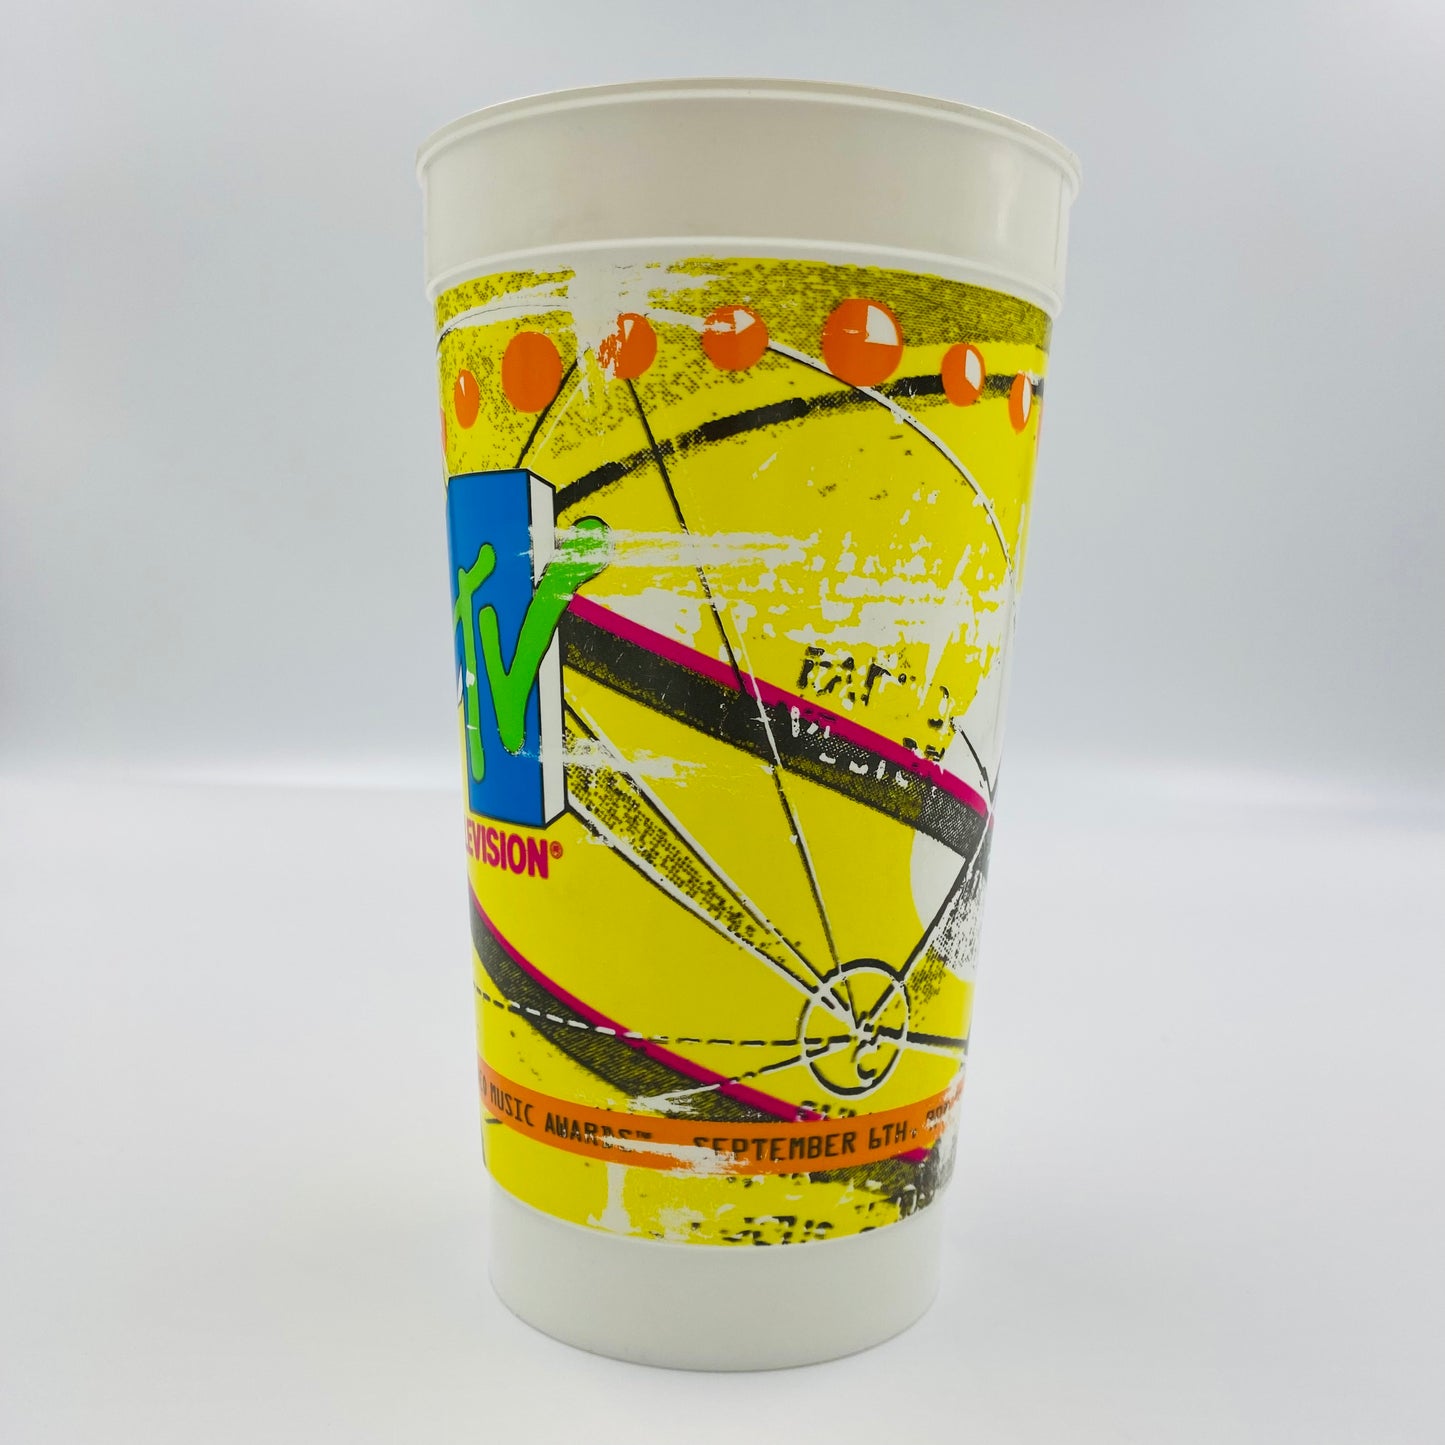 MTV VMA’s Video Music Awards yellow  32oz  plastic cup (1990)Taco Bell